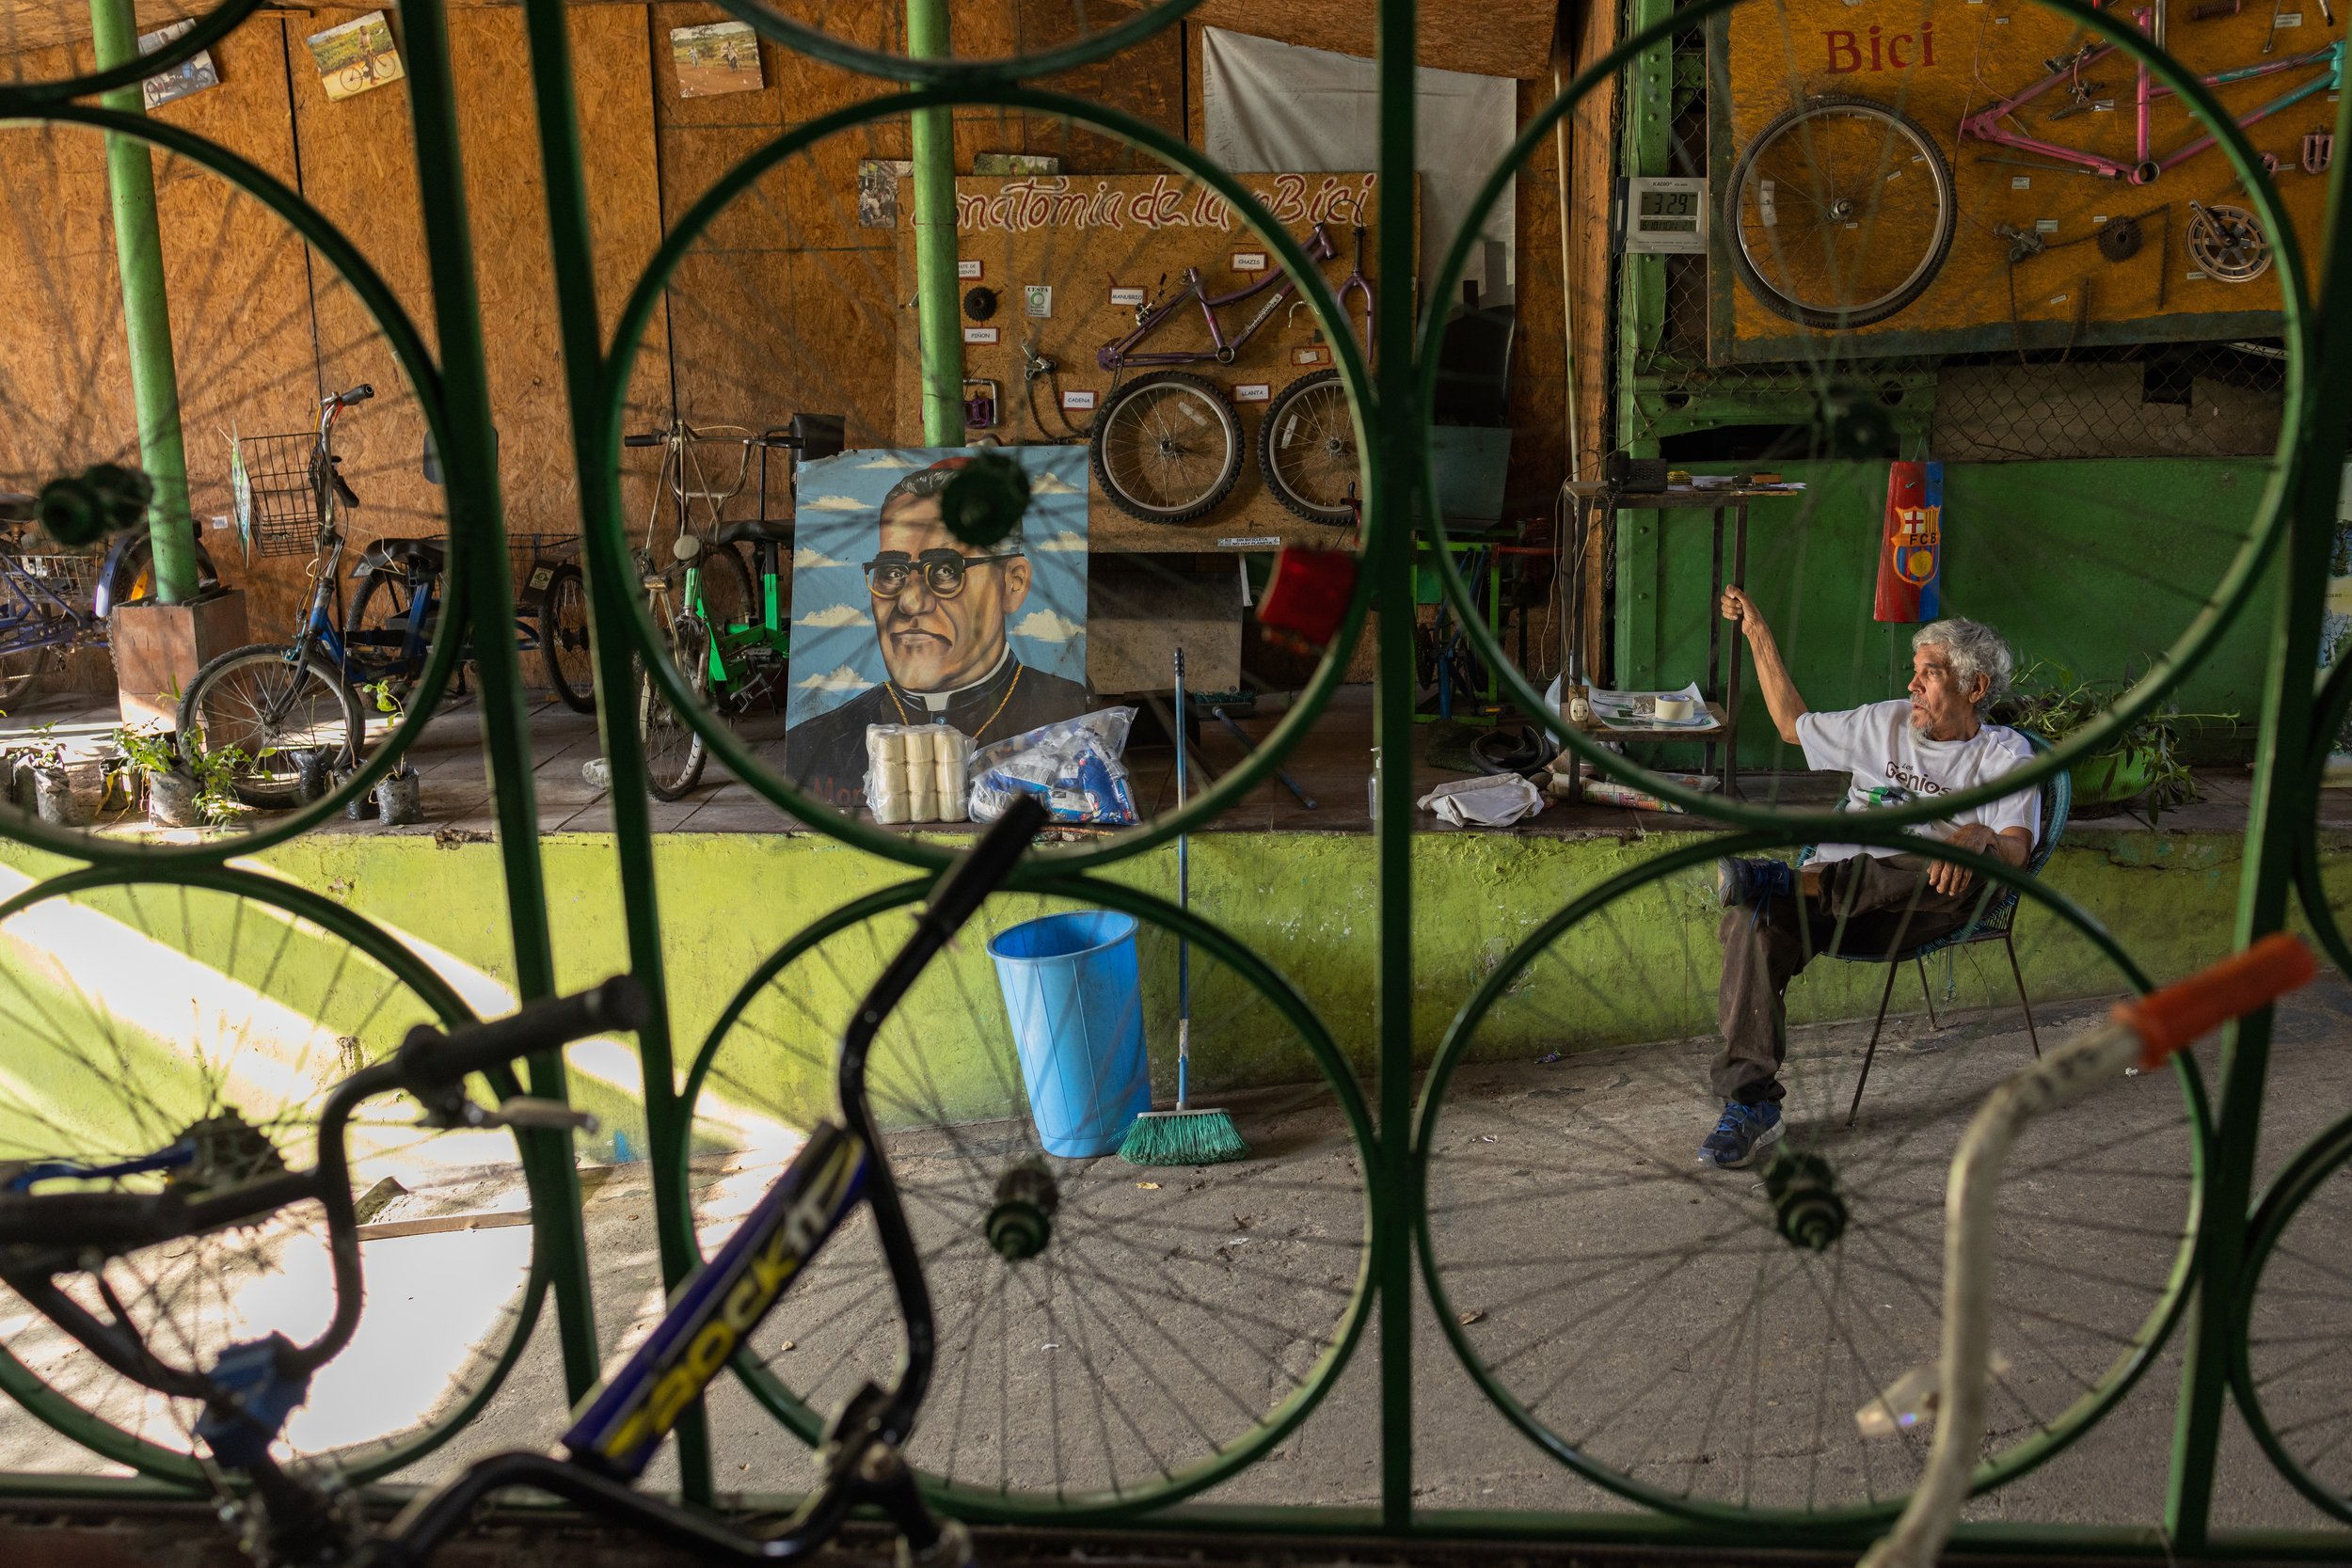  A man watches for customers dropping by the CESTA bike shop.  